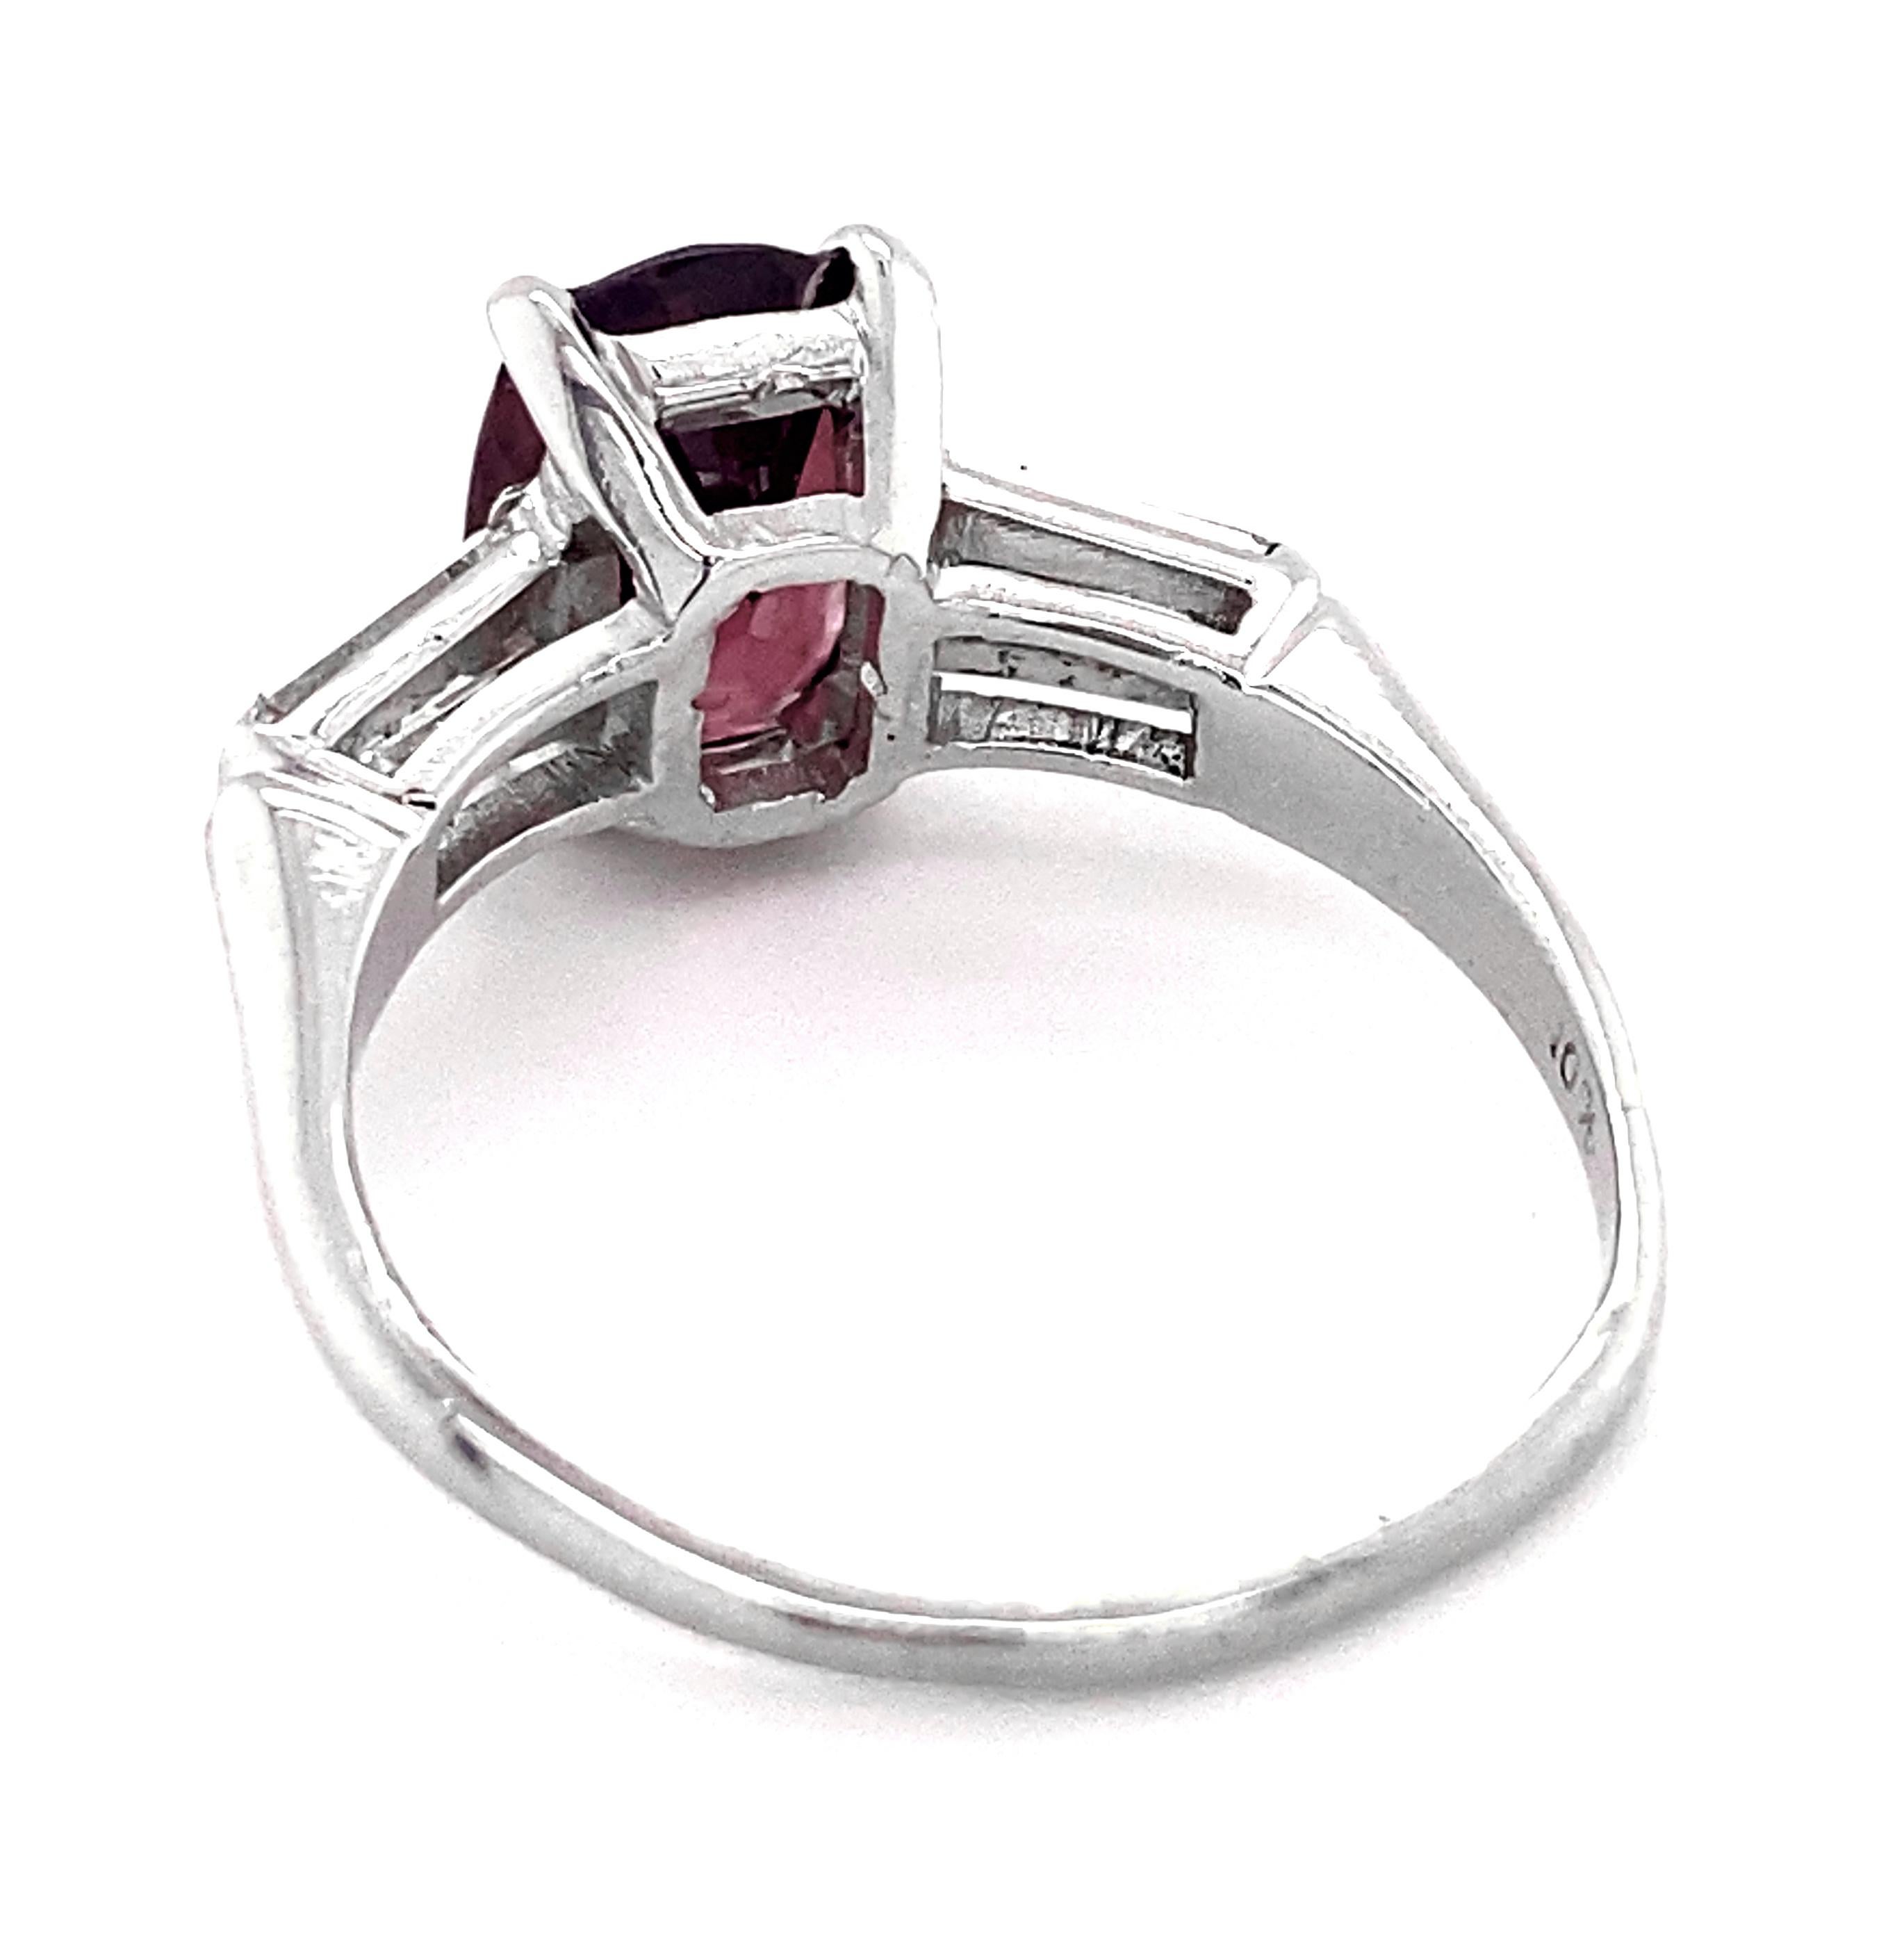 2 Carat Red Spinel Set in Classic Platinum 3-Stone Ring with Diamond Baguettes 3